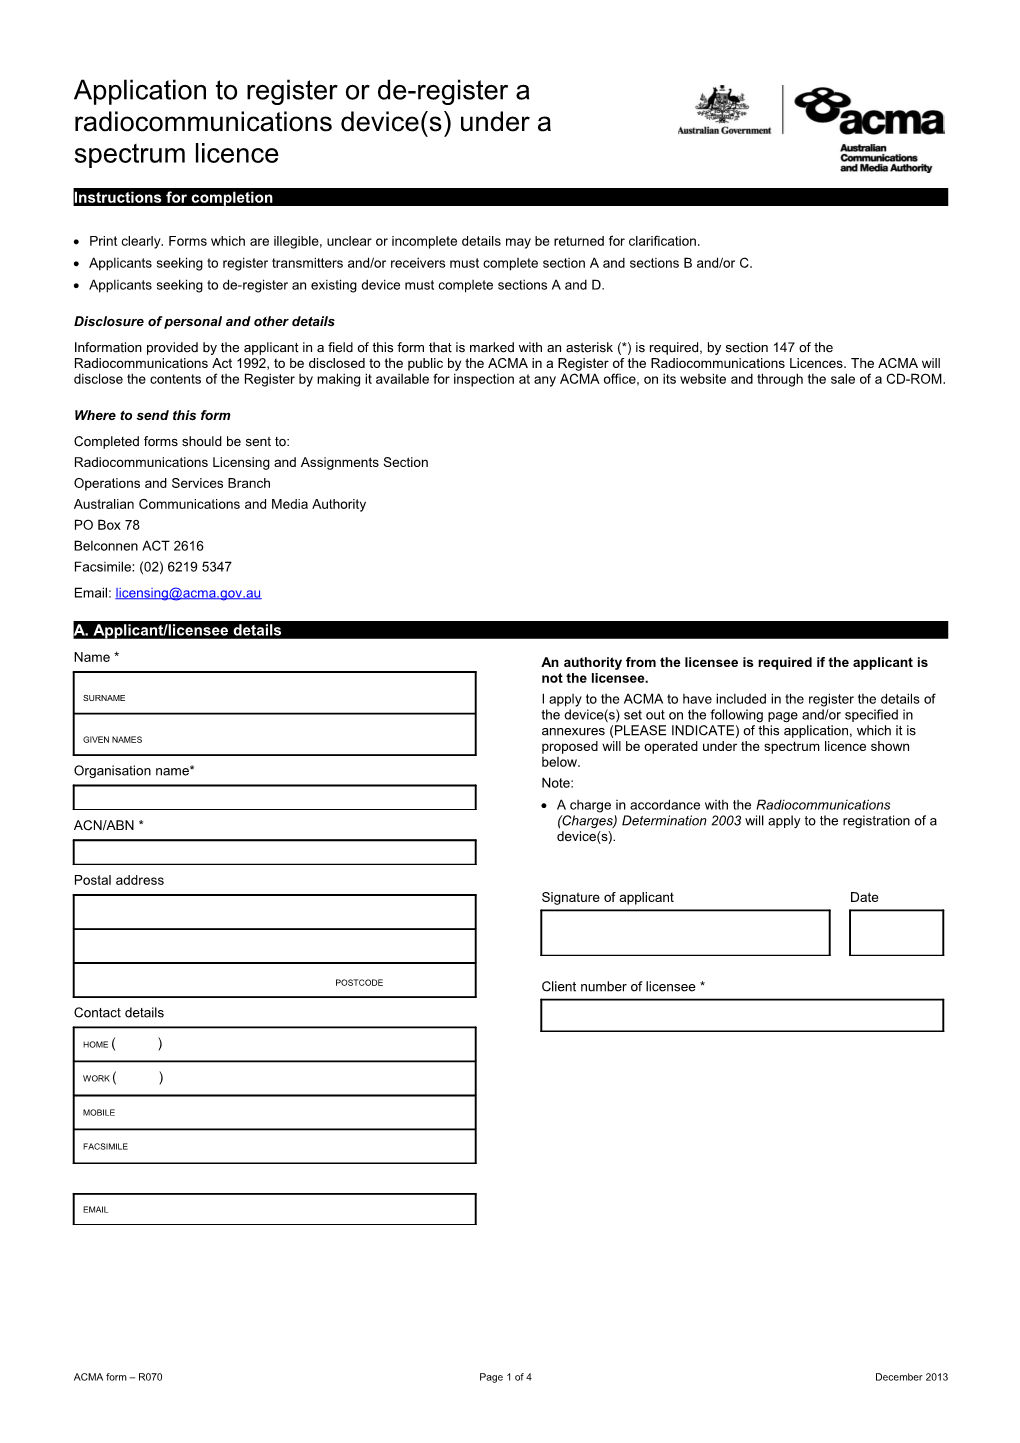 R070 - Application to Register a Radiocommunications Device(S) Operated Under a Spectrum Licence